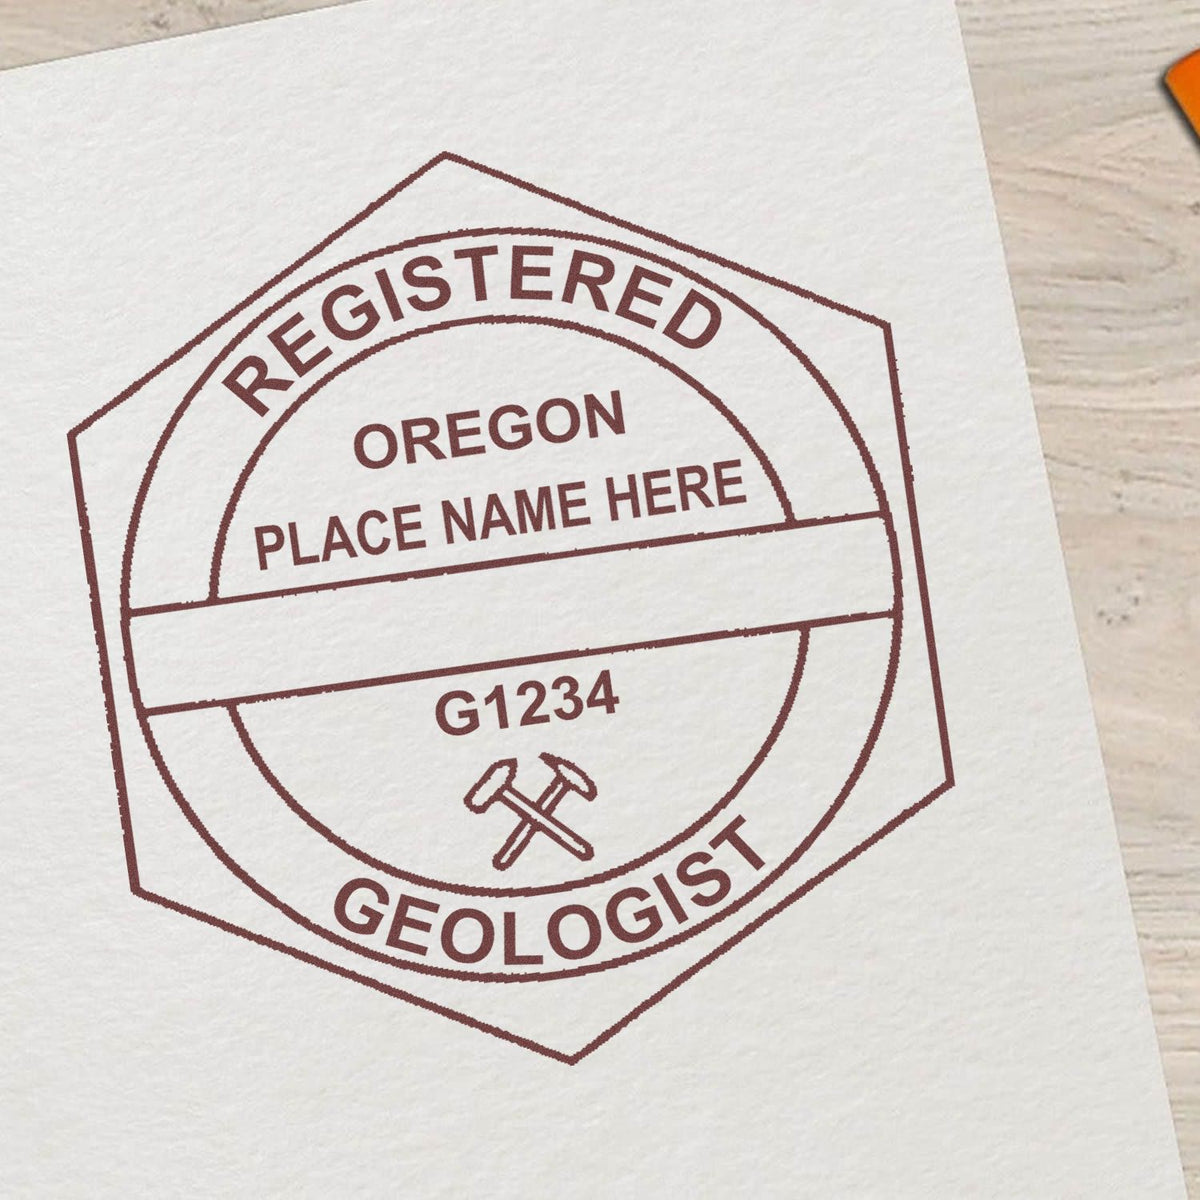 Another Example of a stamped impression of the Digital Oregon Geologist Stamp, Electronic Seal for Oregon Geologist on a office form